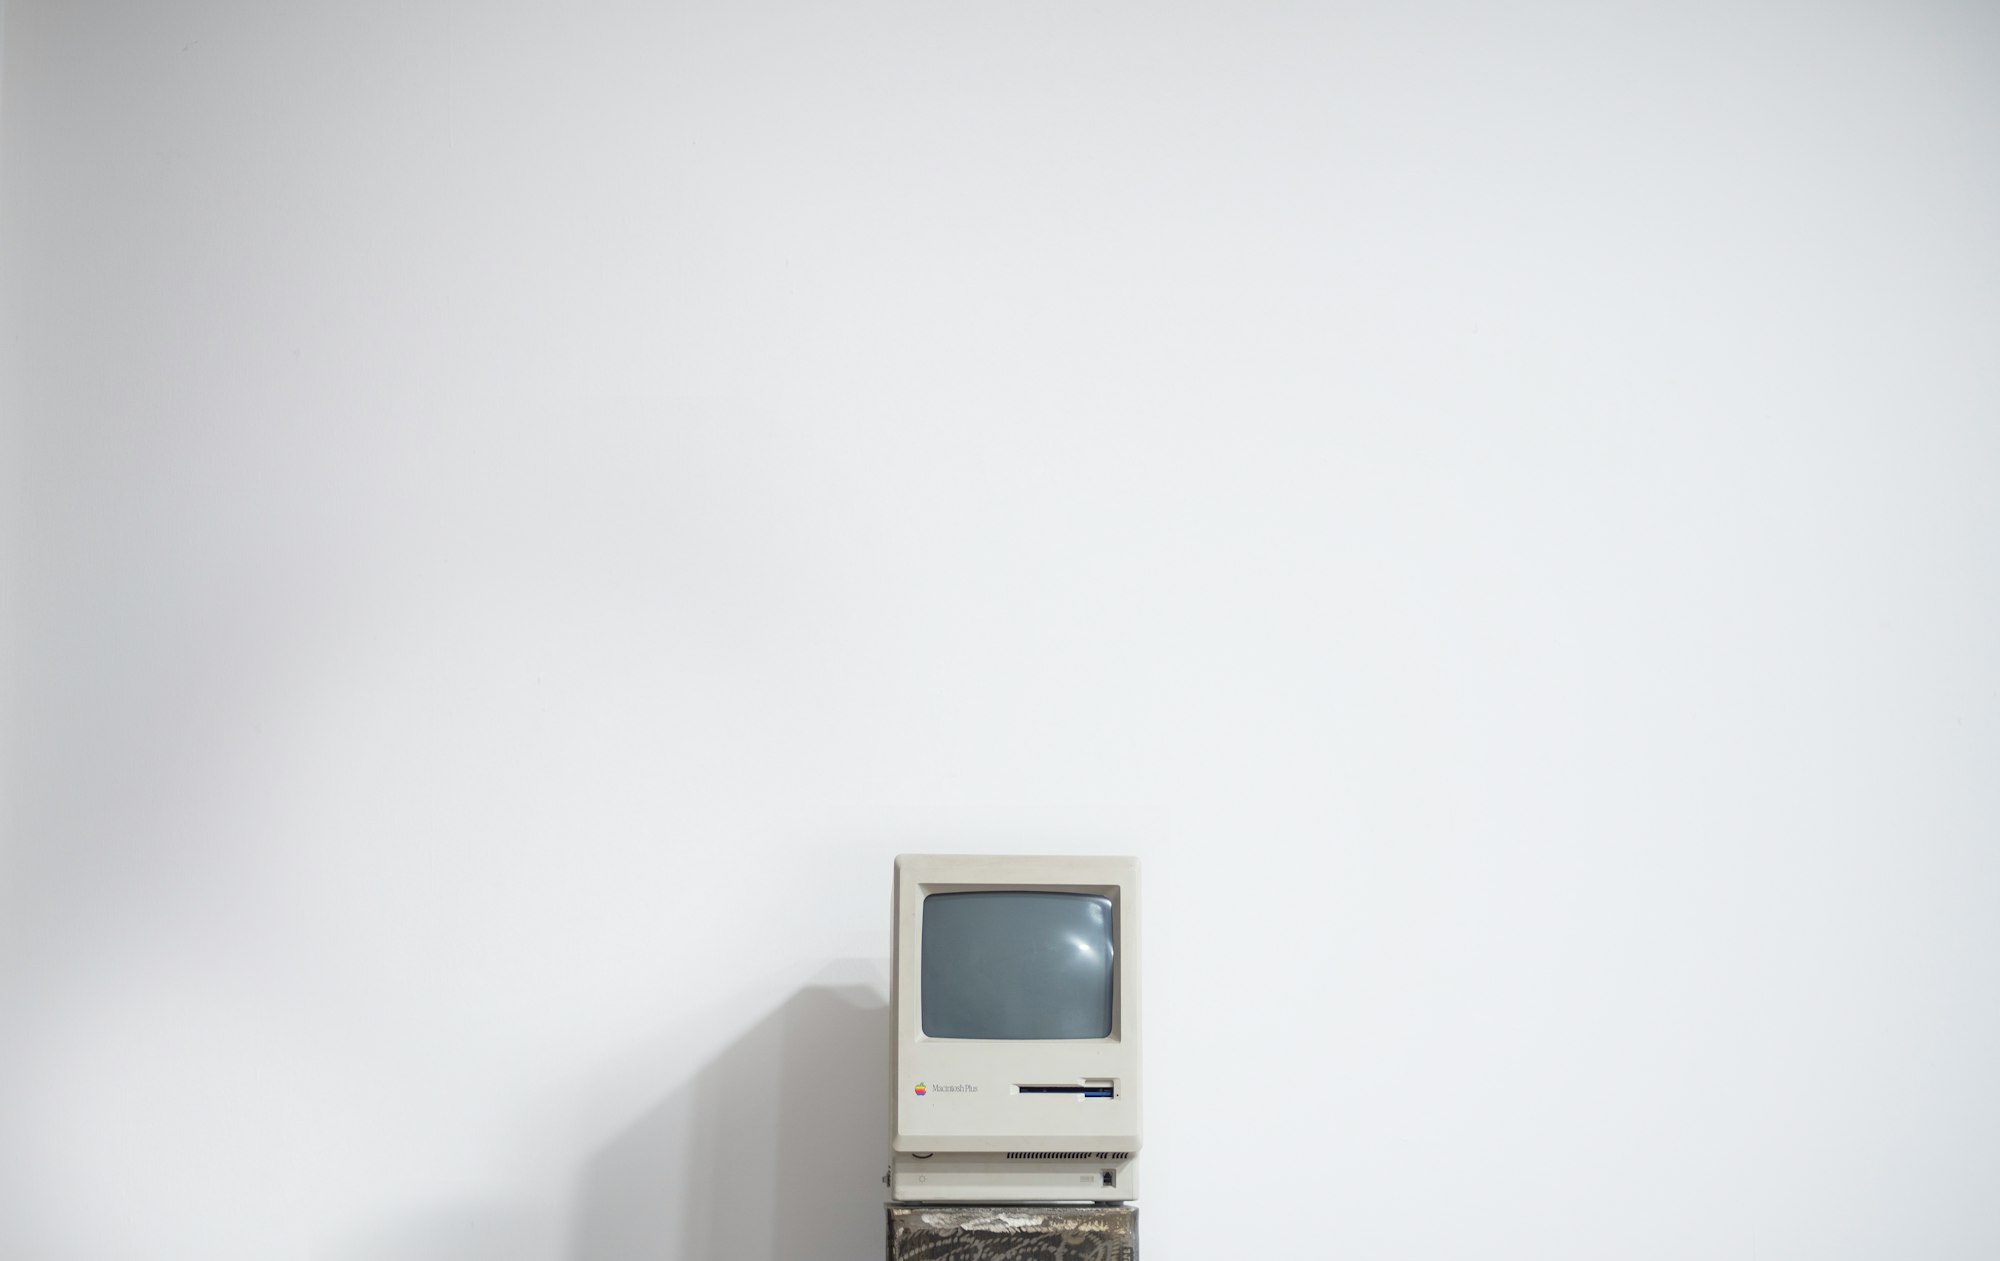 Old Macintosh computer sits alone on a white wall